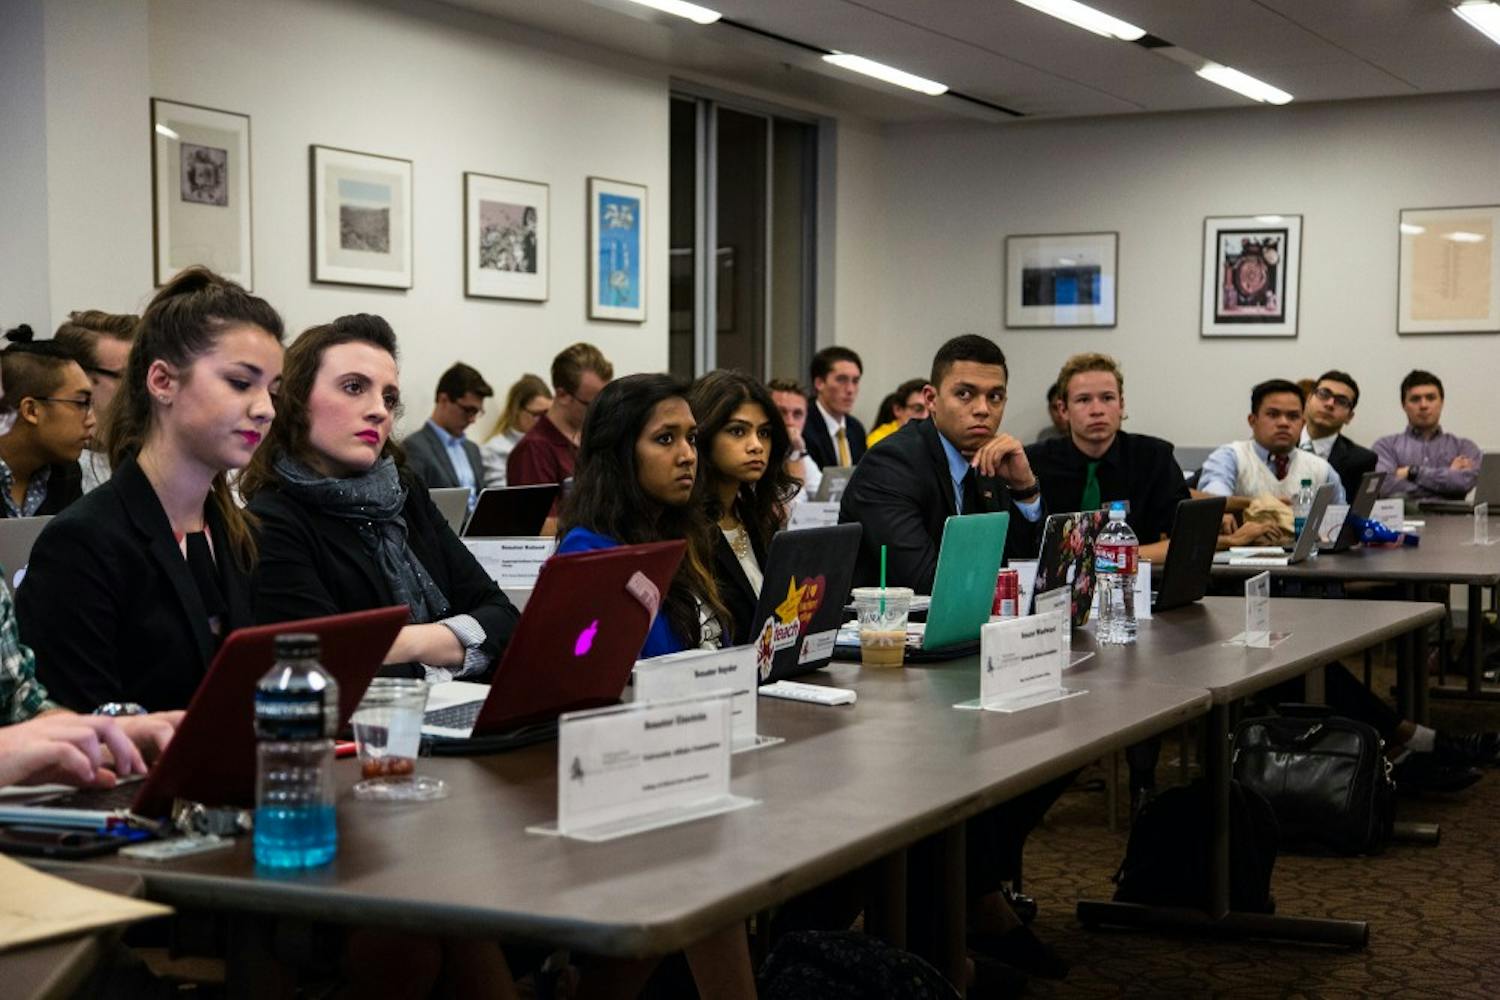 Members of the Tempe USG listen to Senior Senate President Will Smith (not pictured) discuss the agenda at the Memorial Union on Jan. 27, 2015. (Daniel Kwon/ The State Press)